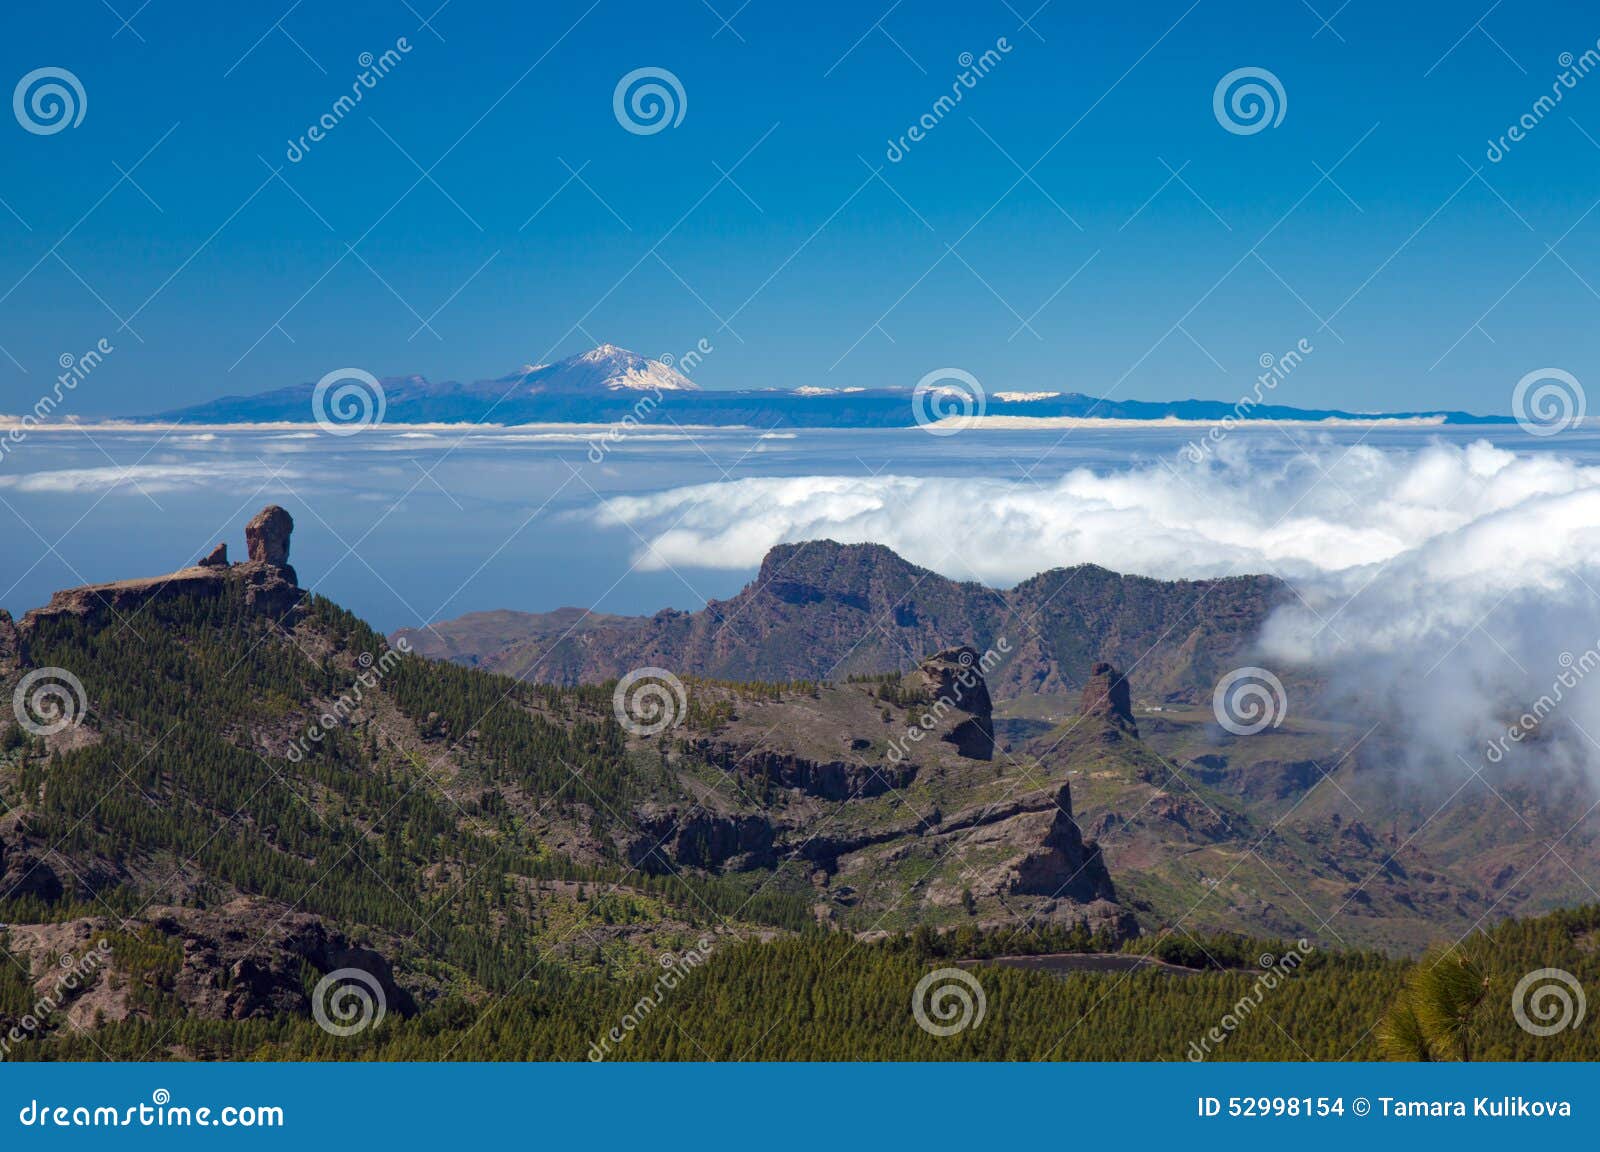 gran canaria, los cumbres - the highest areas of the island